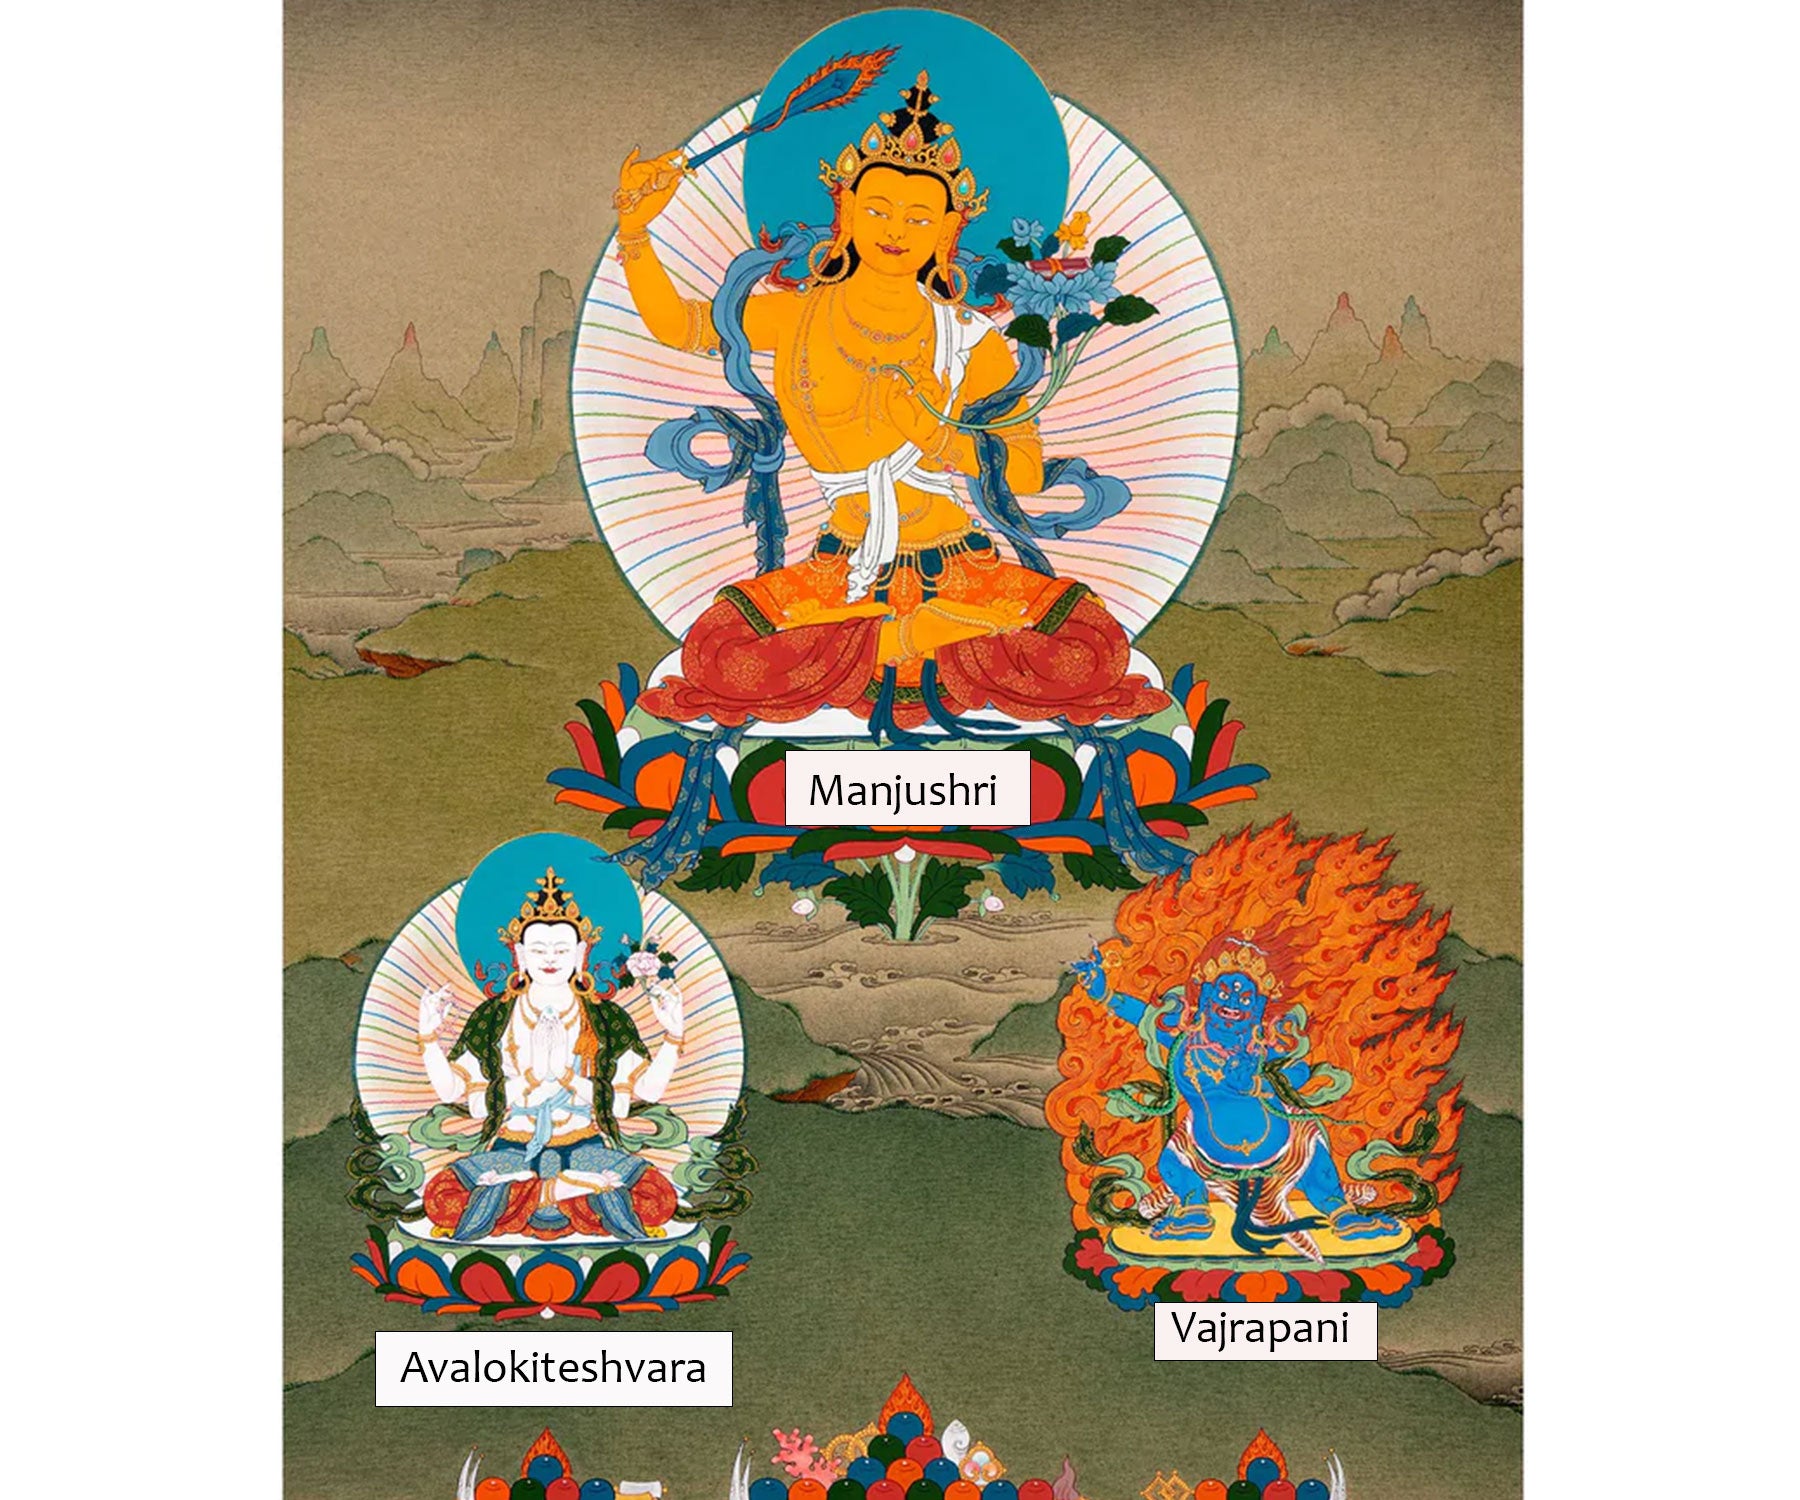 The-Lords-of-Three-Worlds-Thangka-Painting